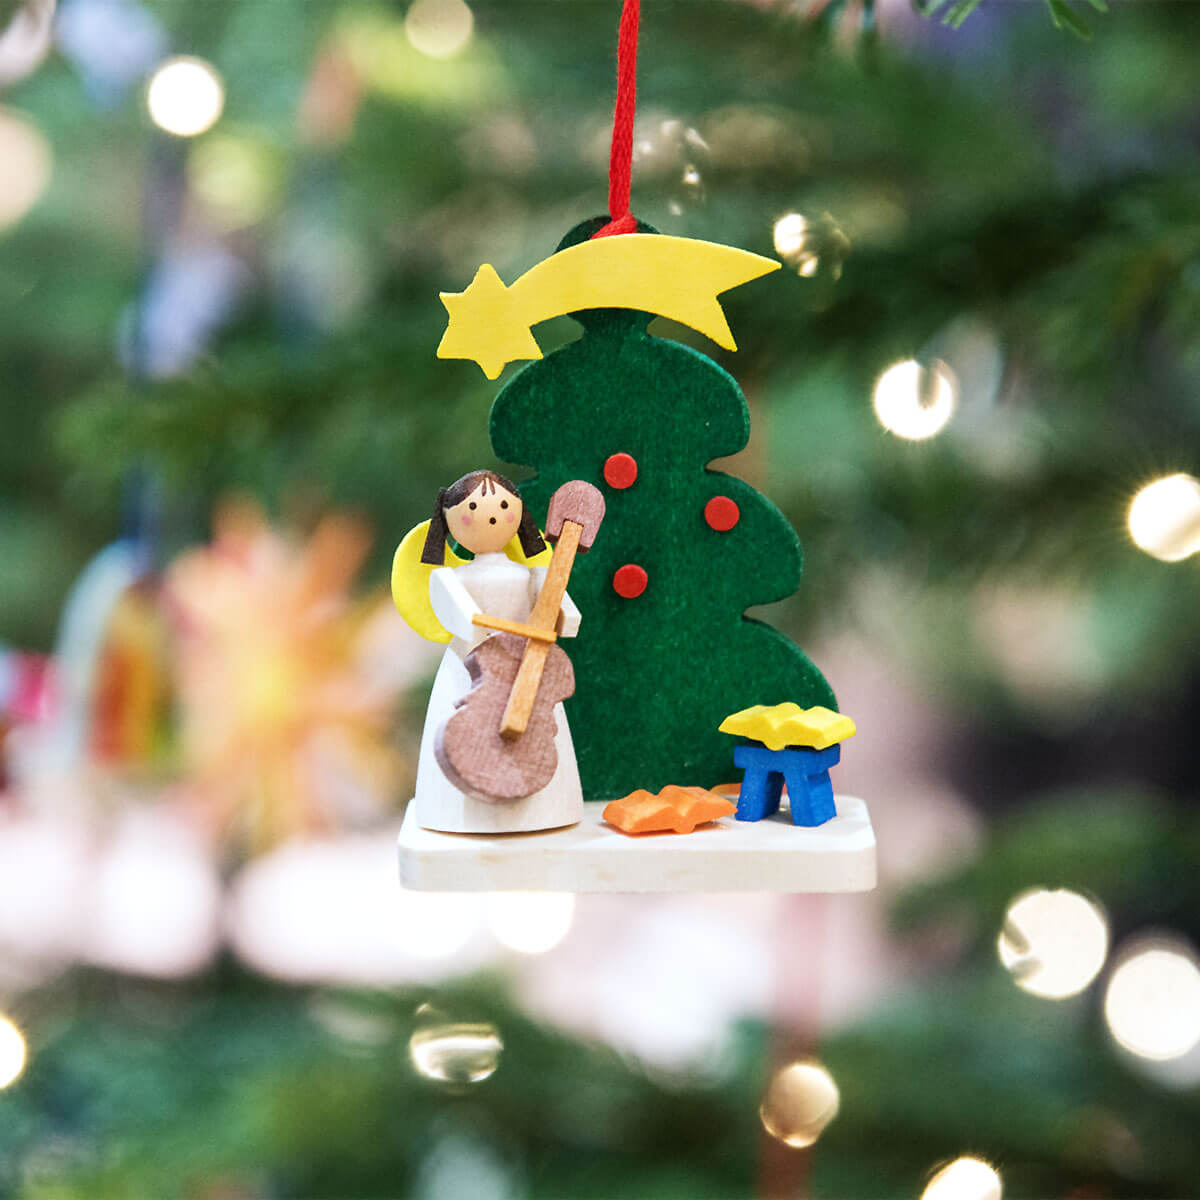 Tree 'Angel' Ornament with birds